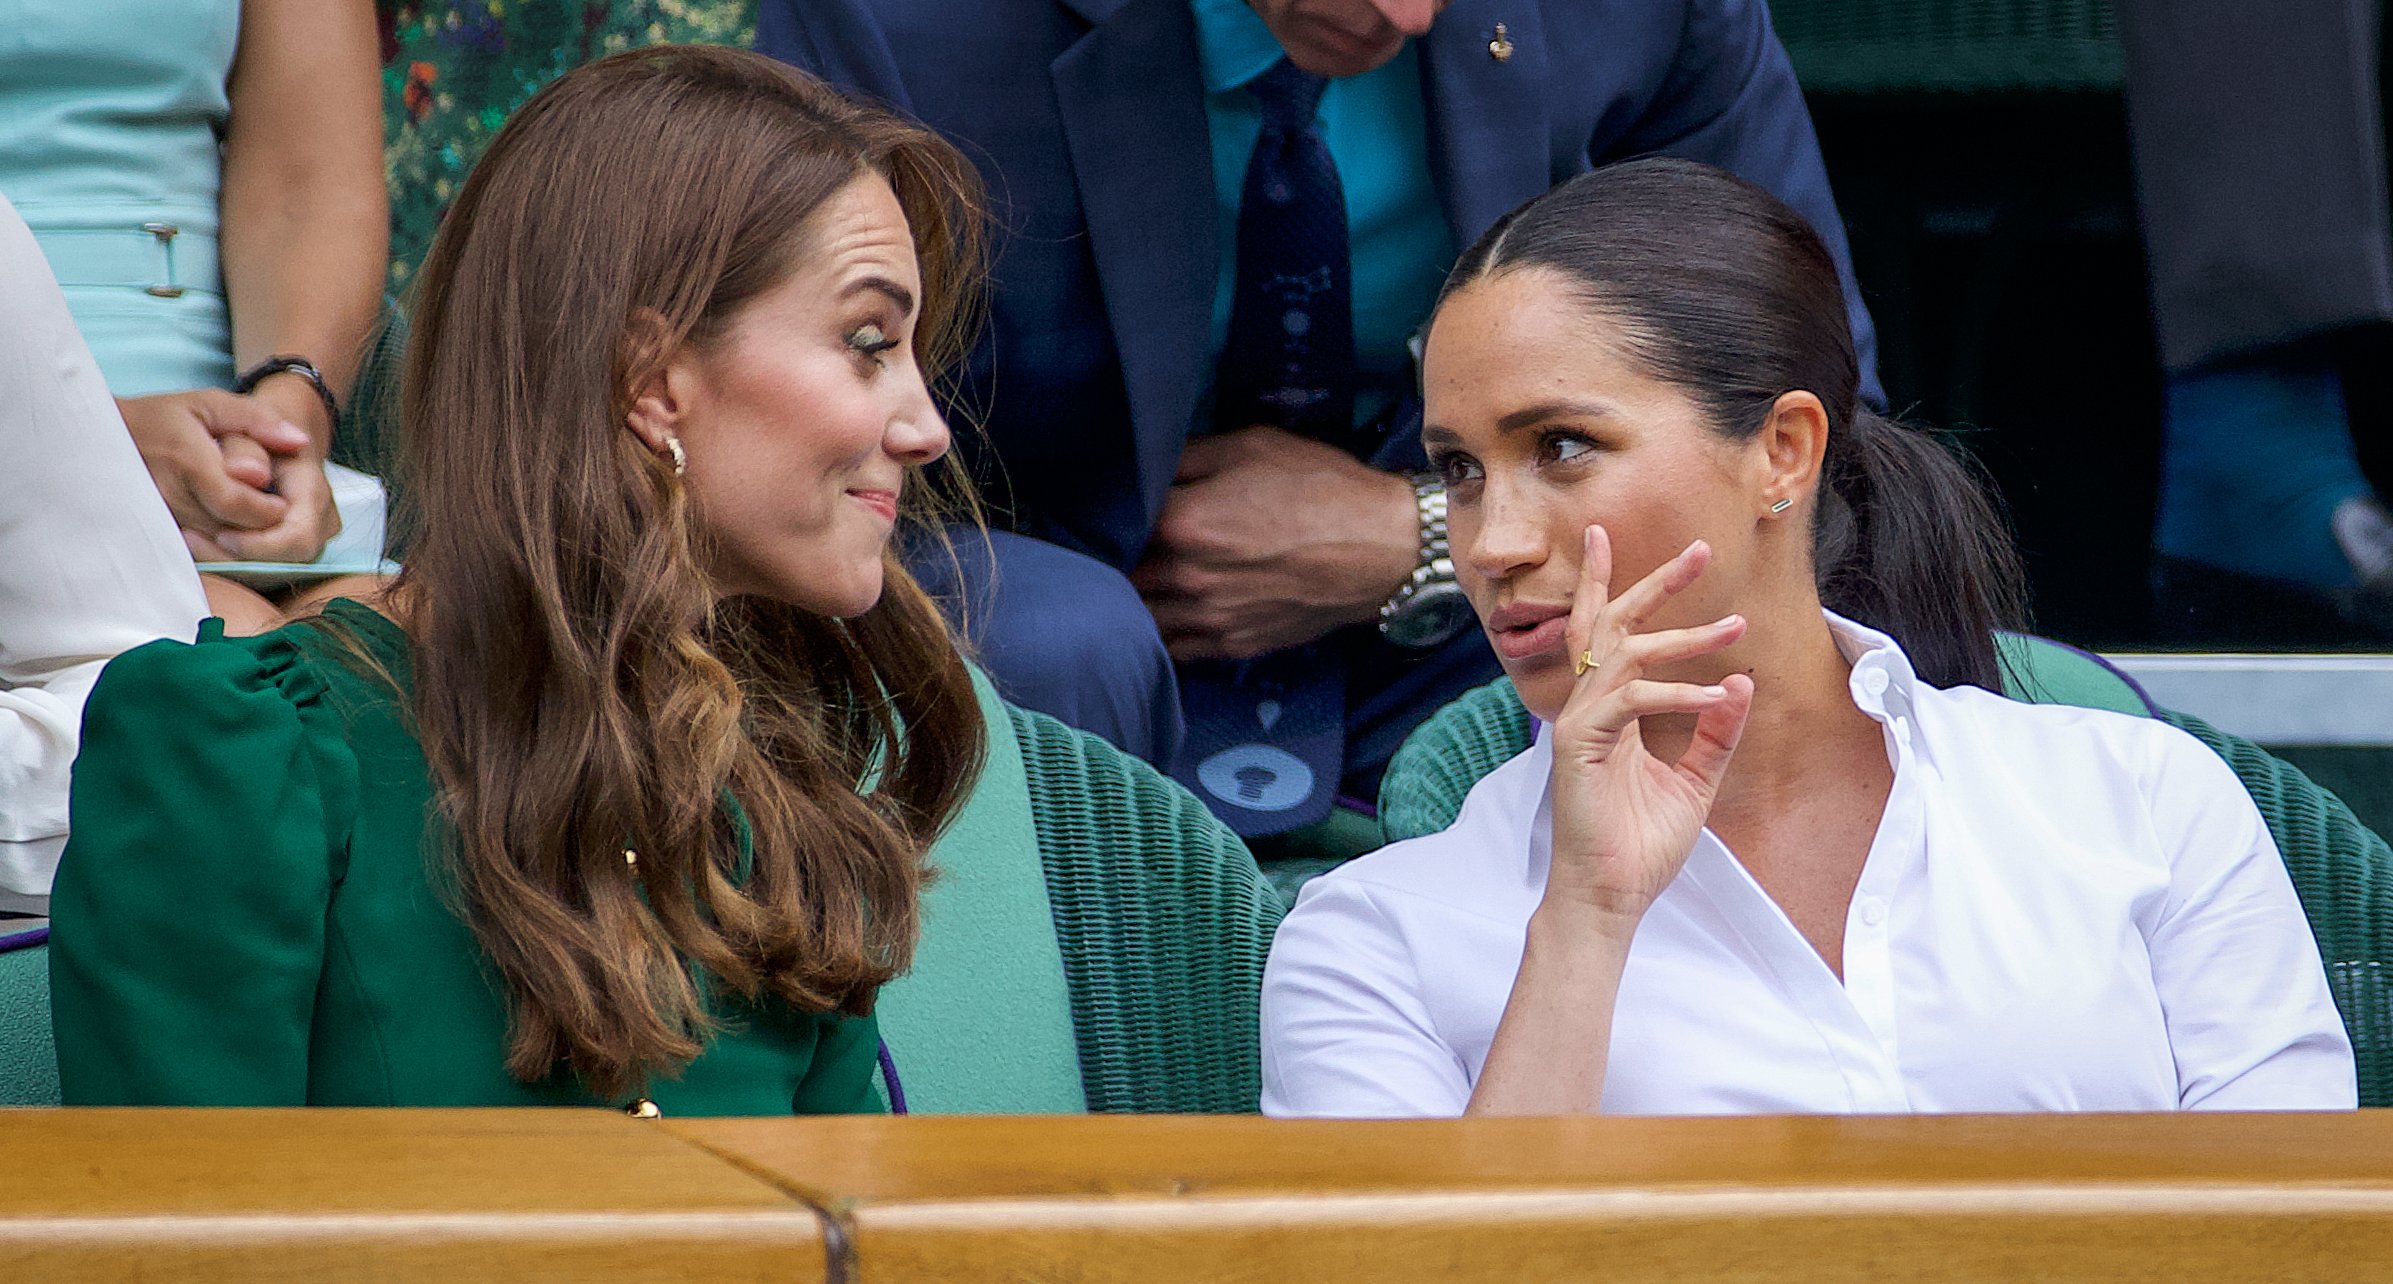 Kate Middleton and Meghan Markle pictured in the Royal Box on Centre Court during the Wimbledon Lawn Tennis Championships at the All England Lawn Tennis and Croquet Club at Wimbledon on July 13, 2019 in London, England. | Source: Getty Images